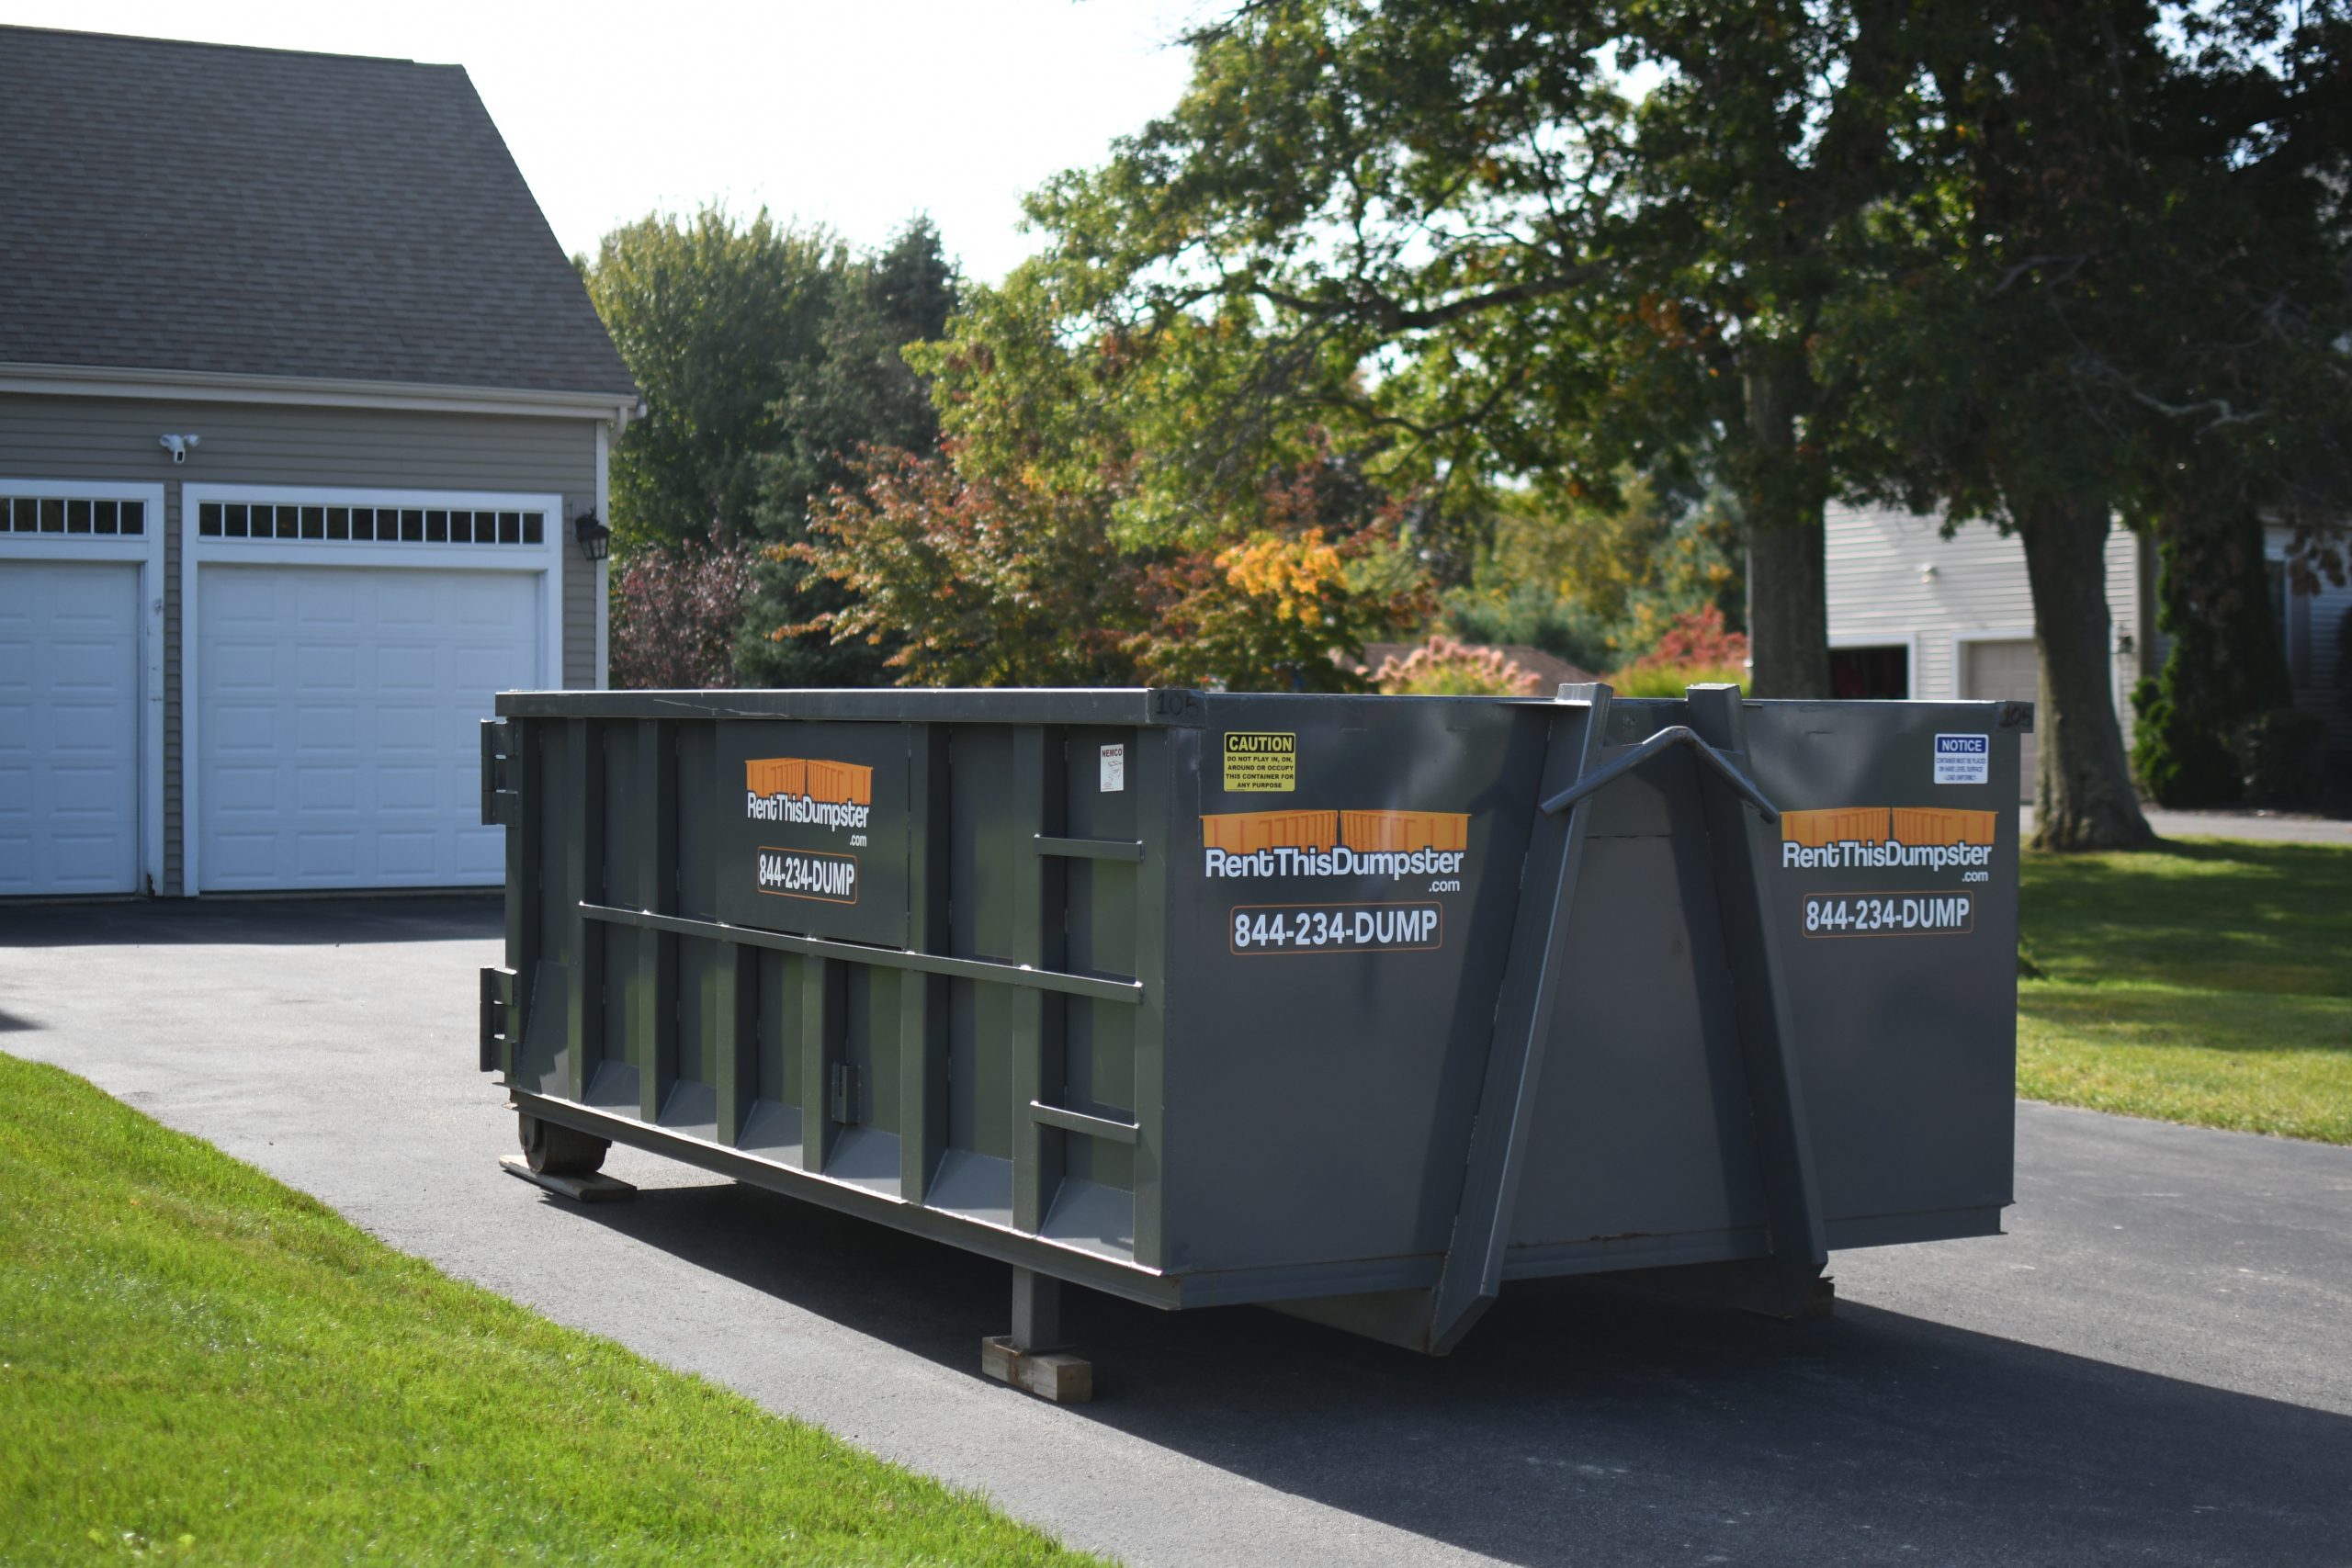 Rent a Dumpster in Brockton, MA | Rent This Dumpster